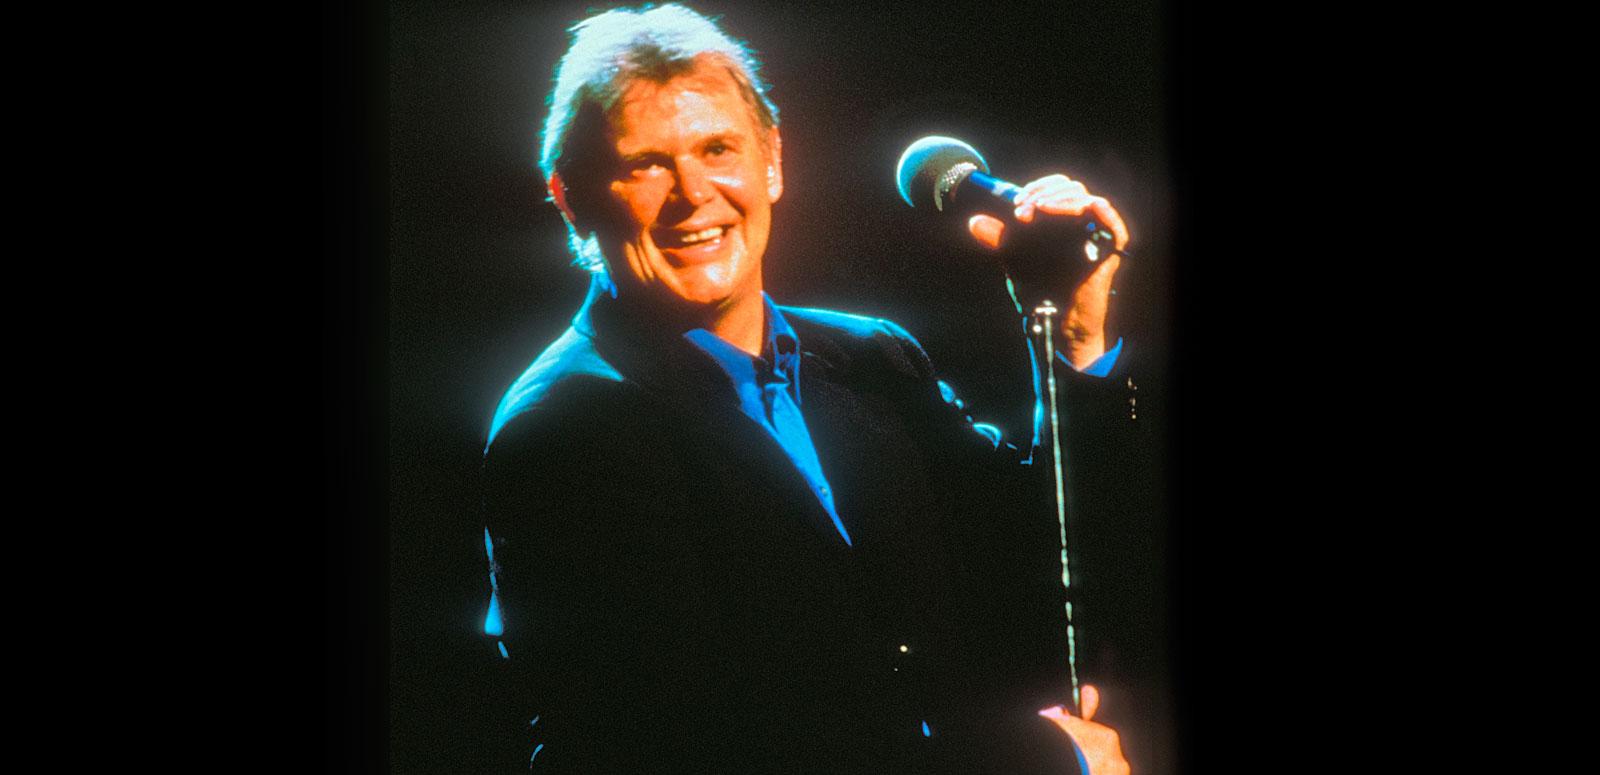 Singer John Farnham, circa late 1990s or early 2000s, pictured from the waist up wearing a black jacket and blue collared shirt, standing on a stage and holding on to a microphone stand. He's smiling at the camera.